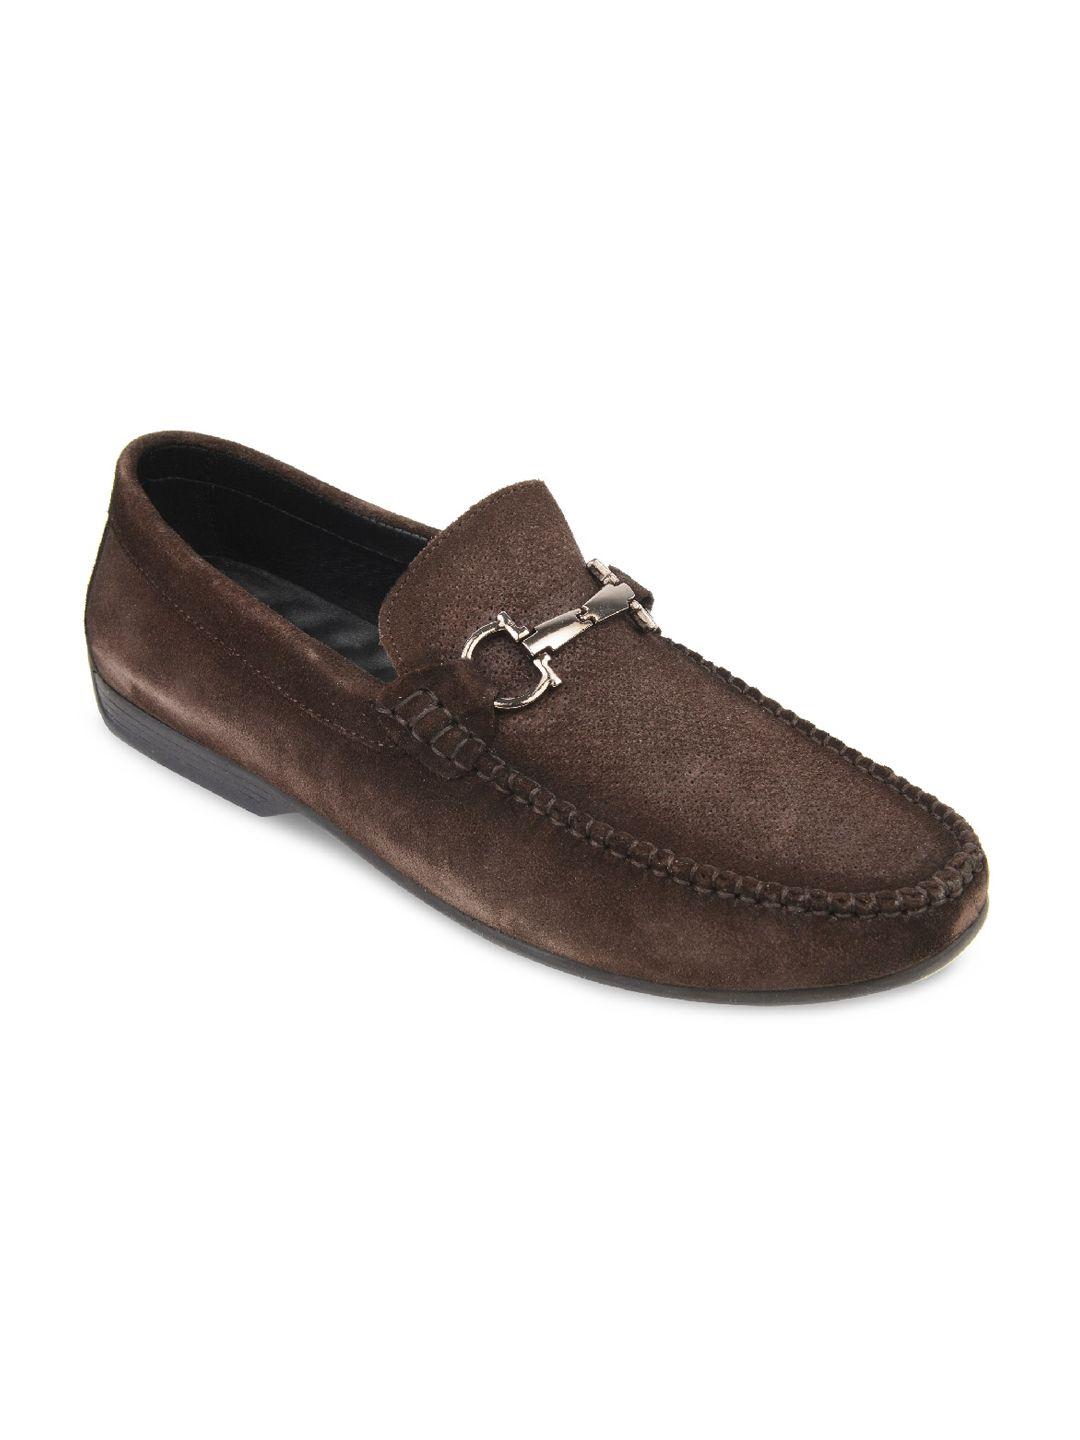 regal-men-brown-textured-leather-loafers